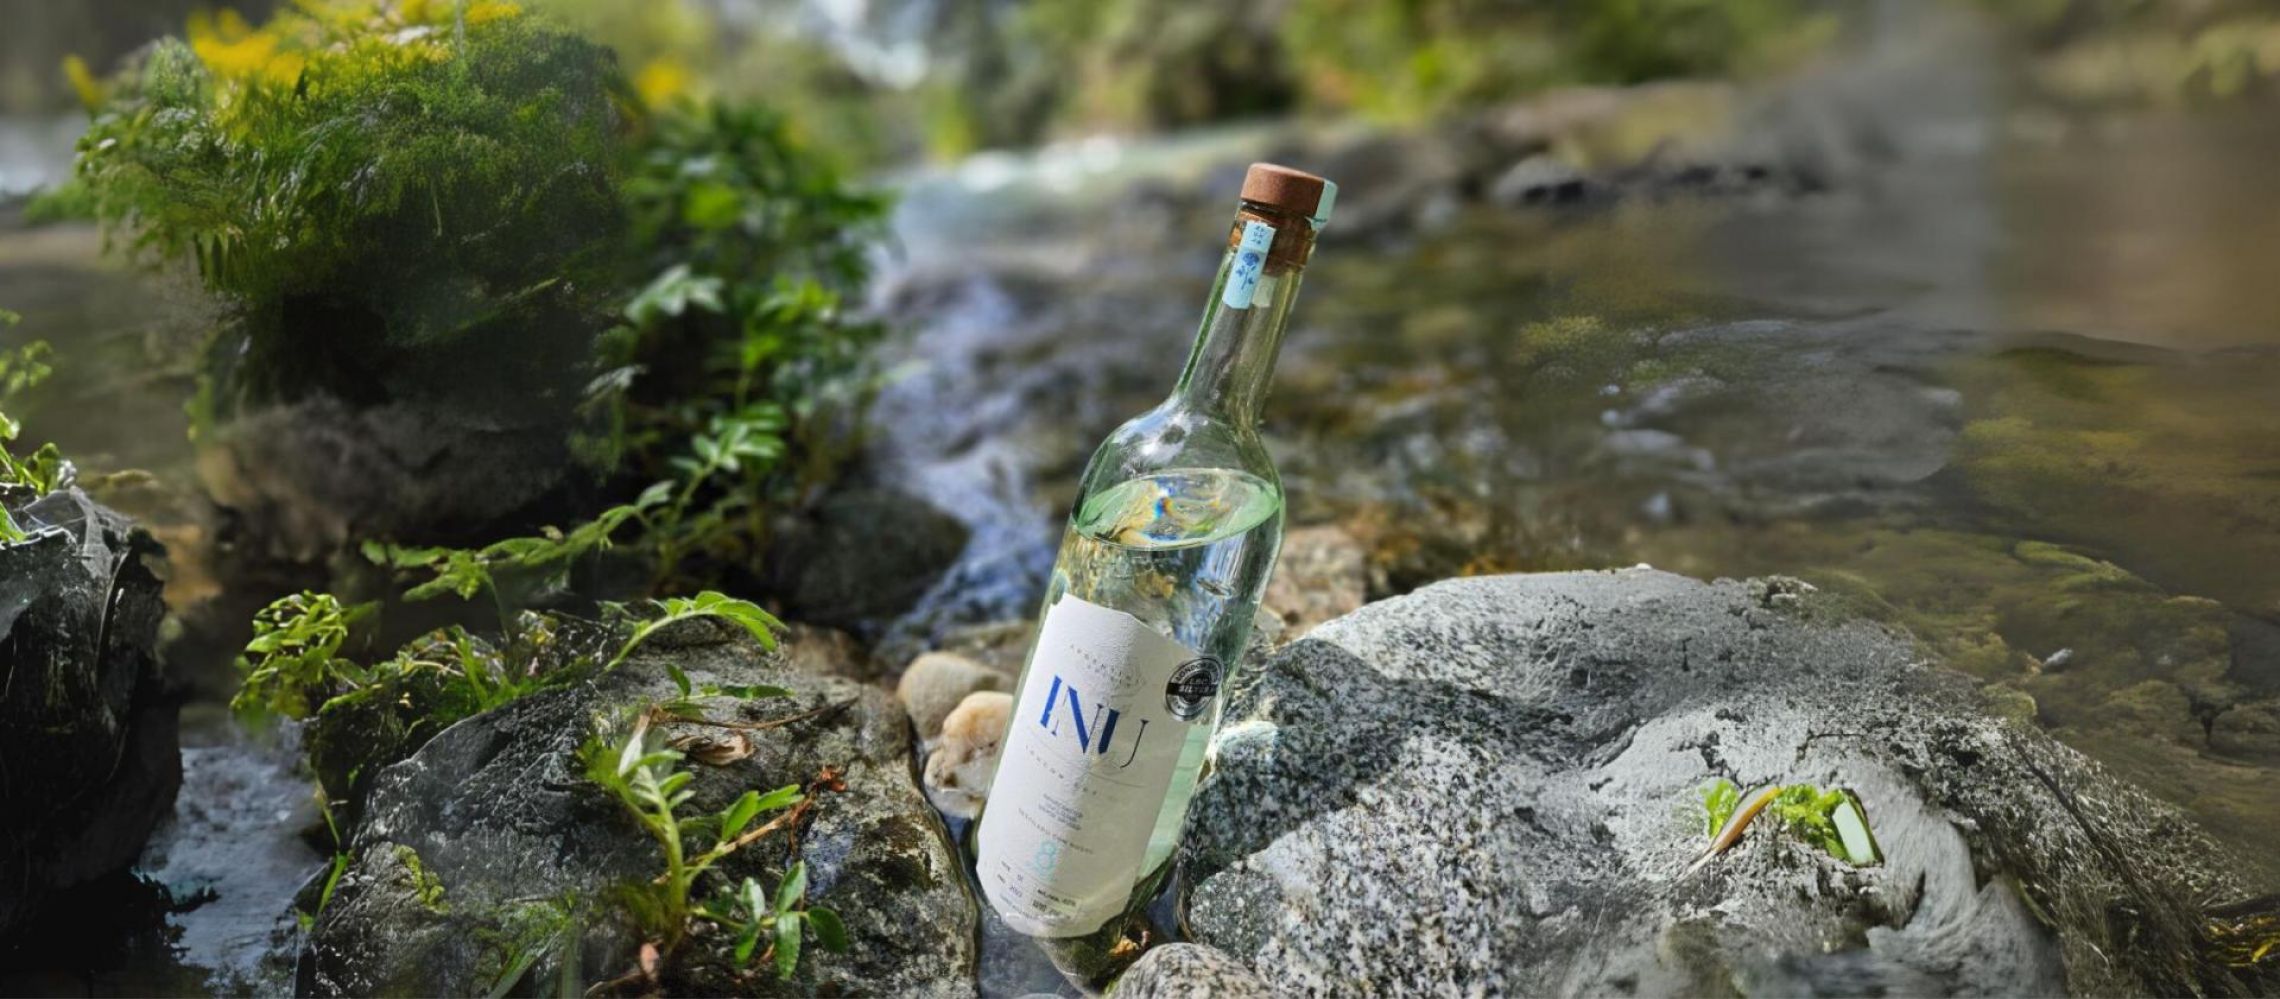 Photo for: INU Gin’s Winner Journey from London's Gem to Global Player at the London Spirits Competition